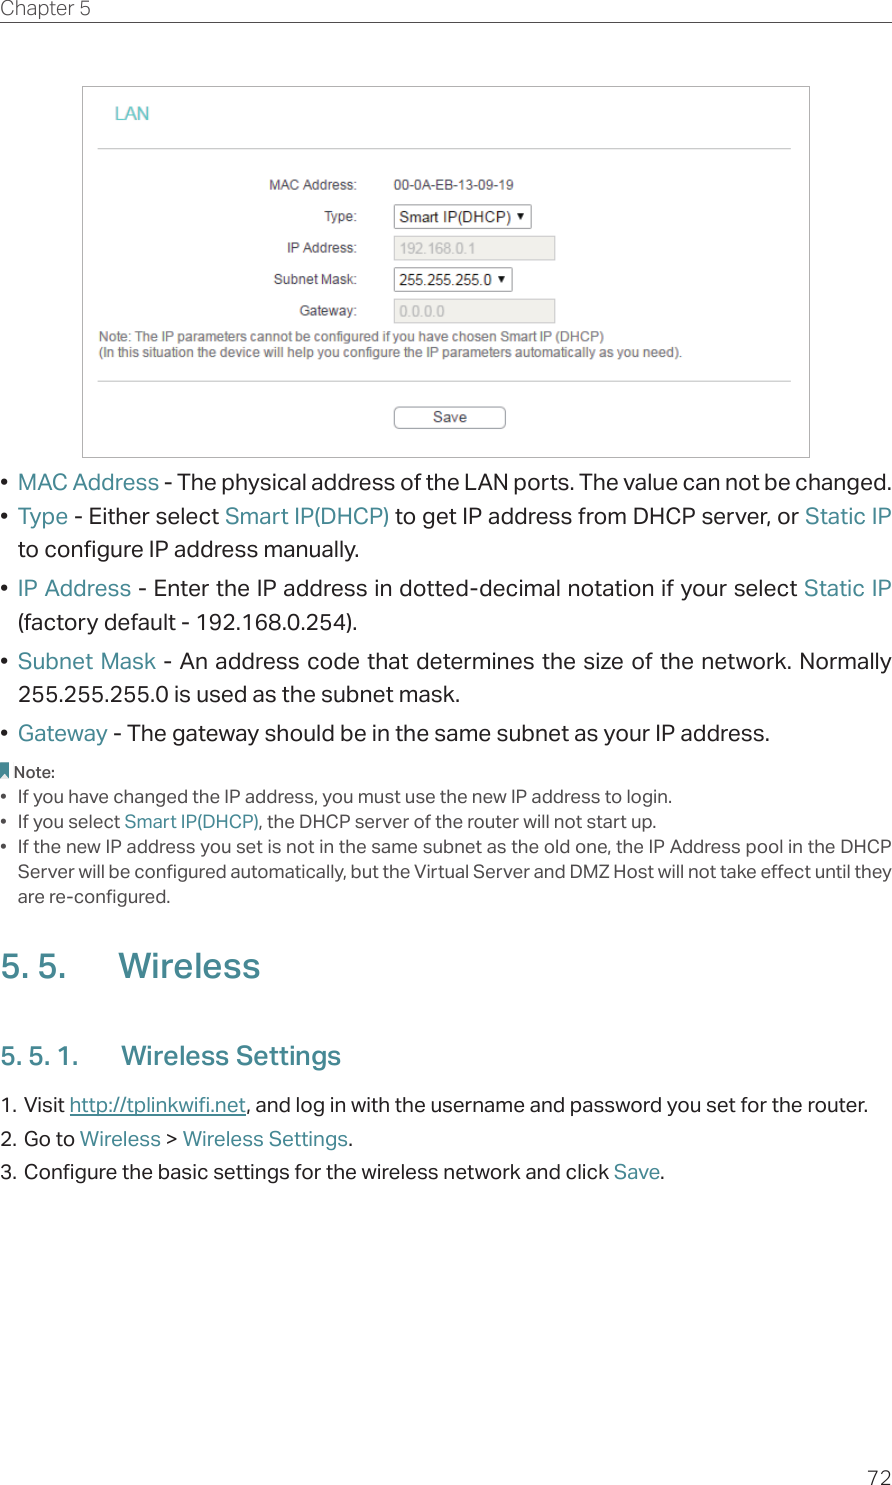 72Chapter 5  •  MAC Address - The physical address of the LAN ports. The value can not be changed.•  Type - Either select Smart IP(DHCP) to get IP address from DHCP server, or Static IP to configure IP address manually.•  IP Address - Enter the IP address in dotted-decimal notation if your select Static IP (factory default - 192.168.0.254).•  Subnet Mask - An address code that determines the size of the network. Normally 255.255.255.0 is used as the subnet mask.•  Gateway - The gateway should be in the same subnet as your IP address.Note:•  If you have changed the IP address, you must use the new IP address to login.•  If you select Smart IP(DHCP), the DHCP server of the router will not start up.•  If the new IP address you set is not in the same subnet as the old one, the IP Address pool in the DHCP Server will be configured automatically, but the Virtual Server and DMZ Host will not take effect until they are re-configured.5. 5.  Wireless5. 5. 1.  Wireless Settings1. Visit http://tplinkwifi.net, and log in with the username and password you set for the router.2. Go to Wireless &gt; Wireless Settings. 3. Configure the basic settings for the wireless network and click Save.